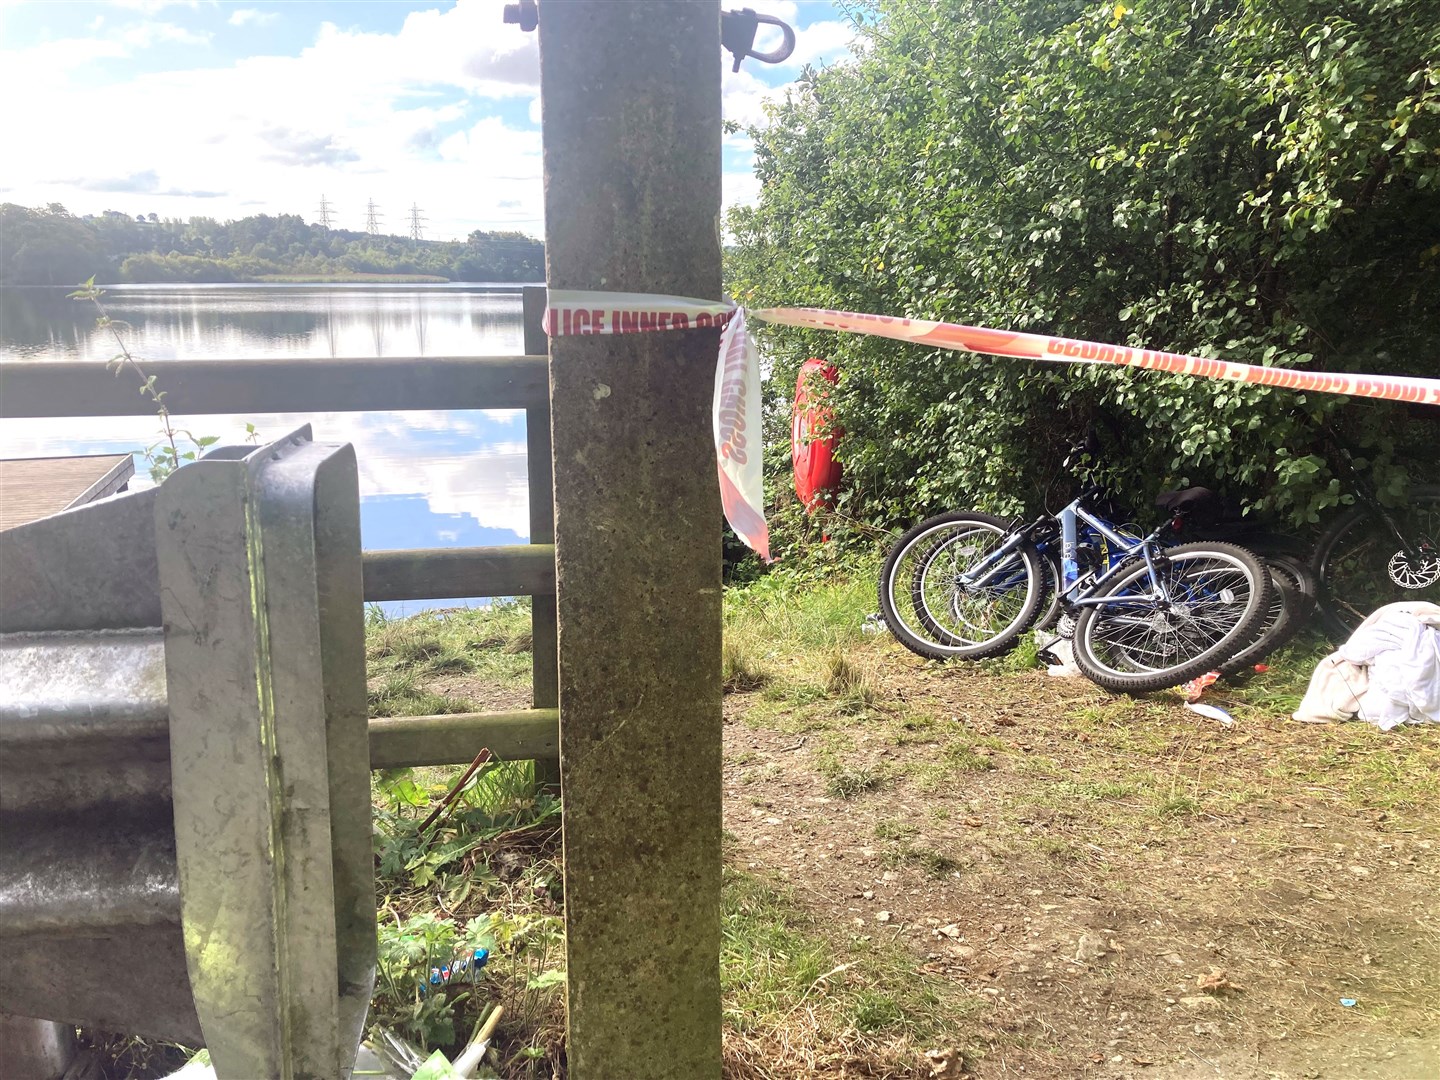 The scene at Enagh Lough on the outskirts of Londonderry where two boys died after getting into trouble in the water on Monday evening. (PA)